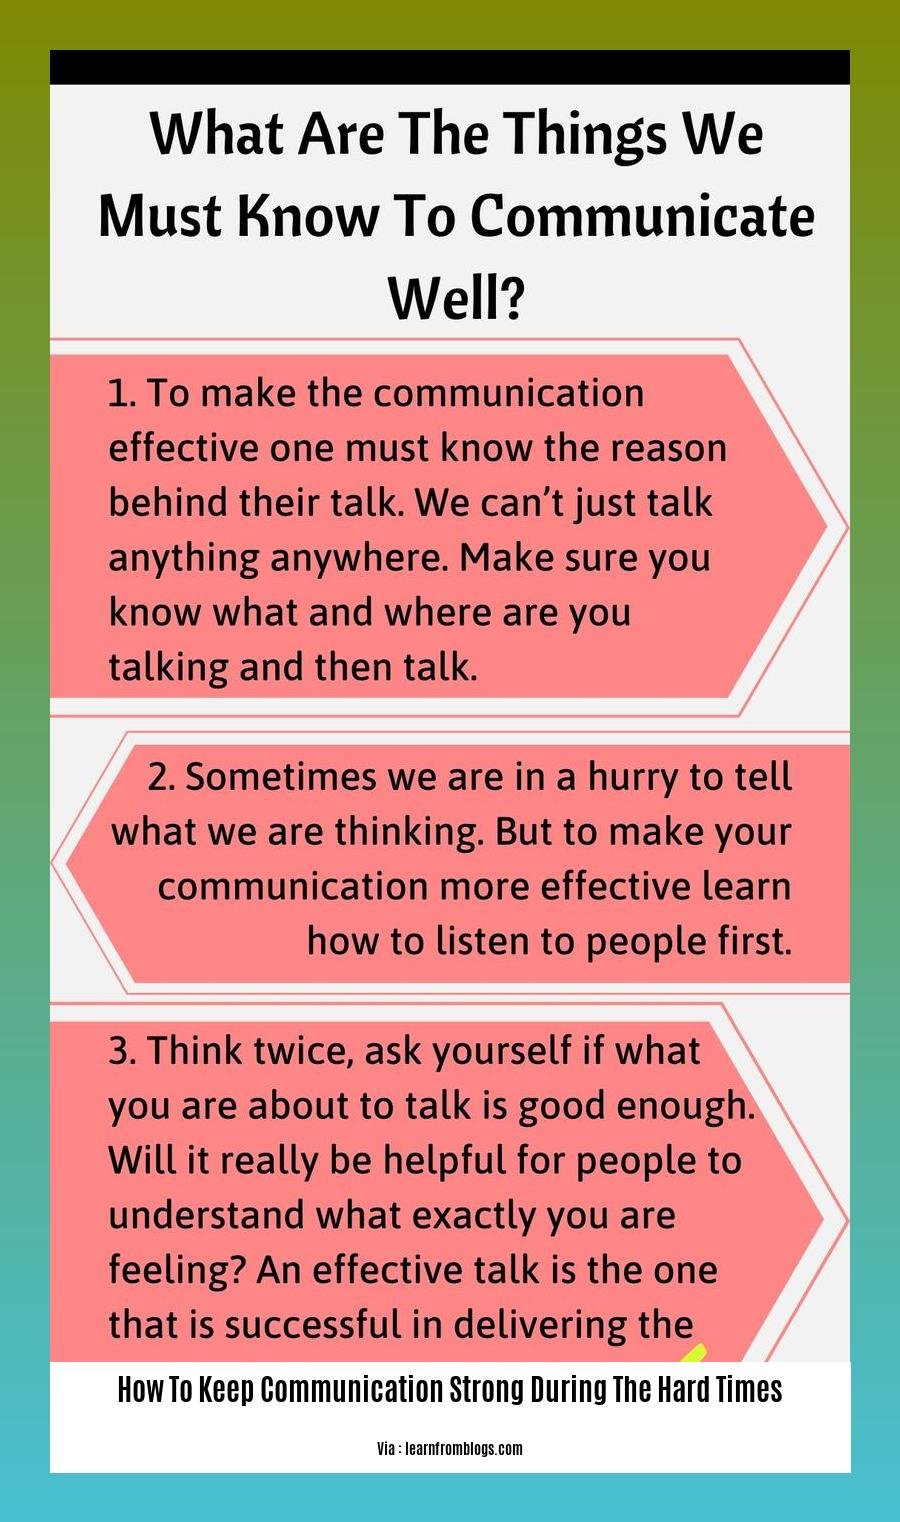 how to keep communication strong during the hard times